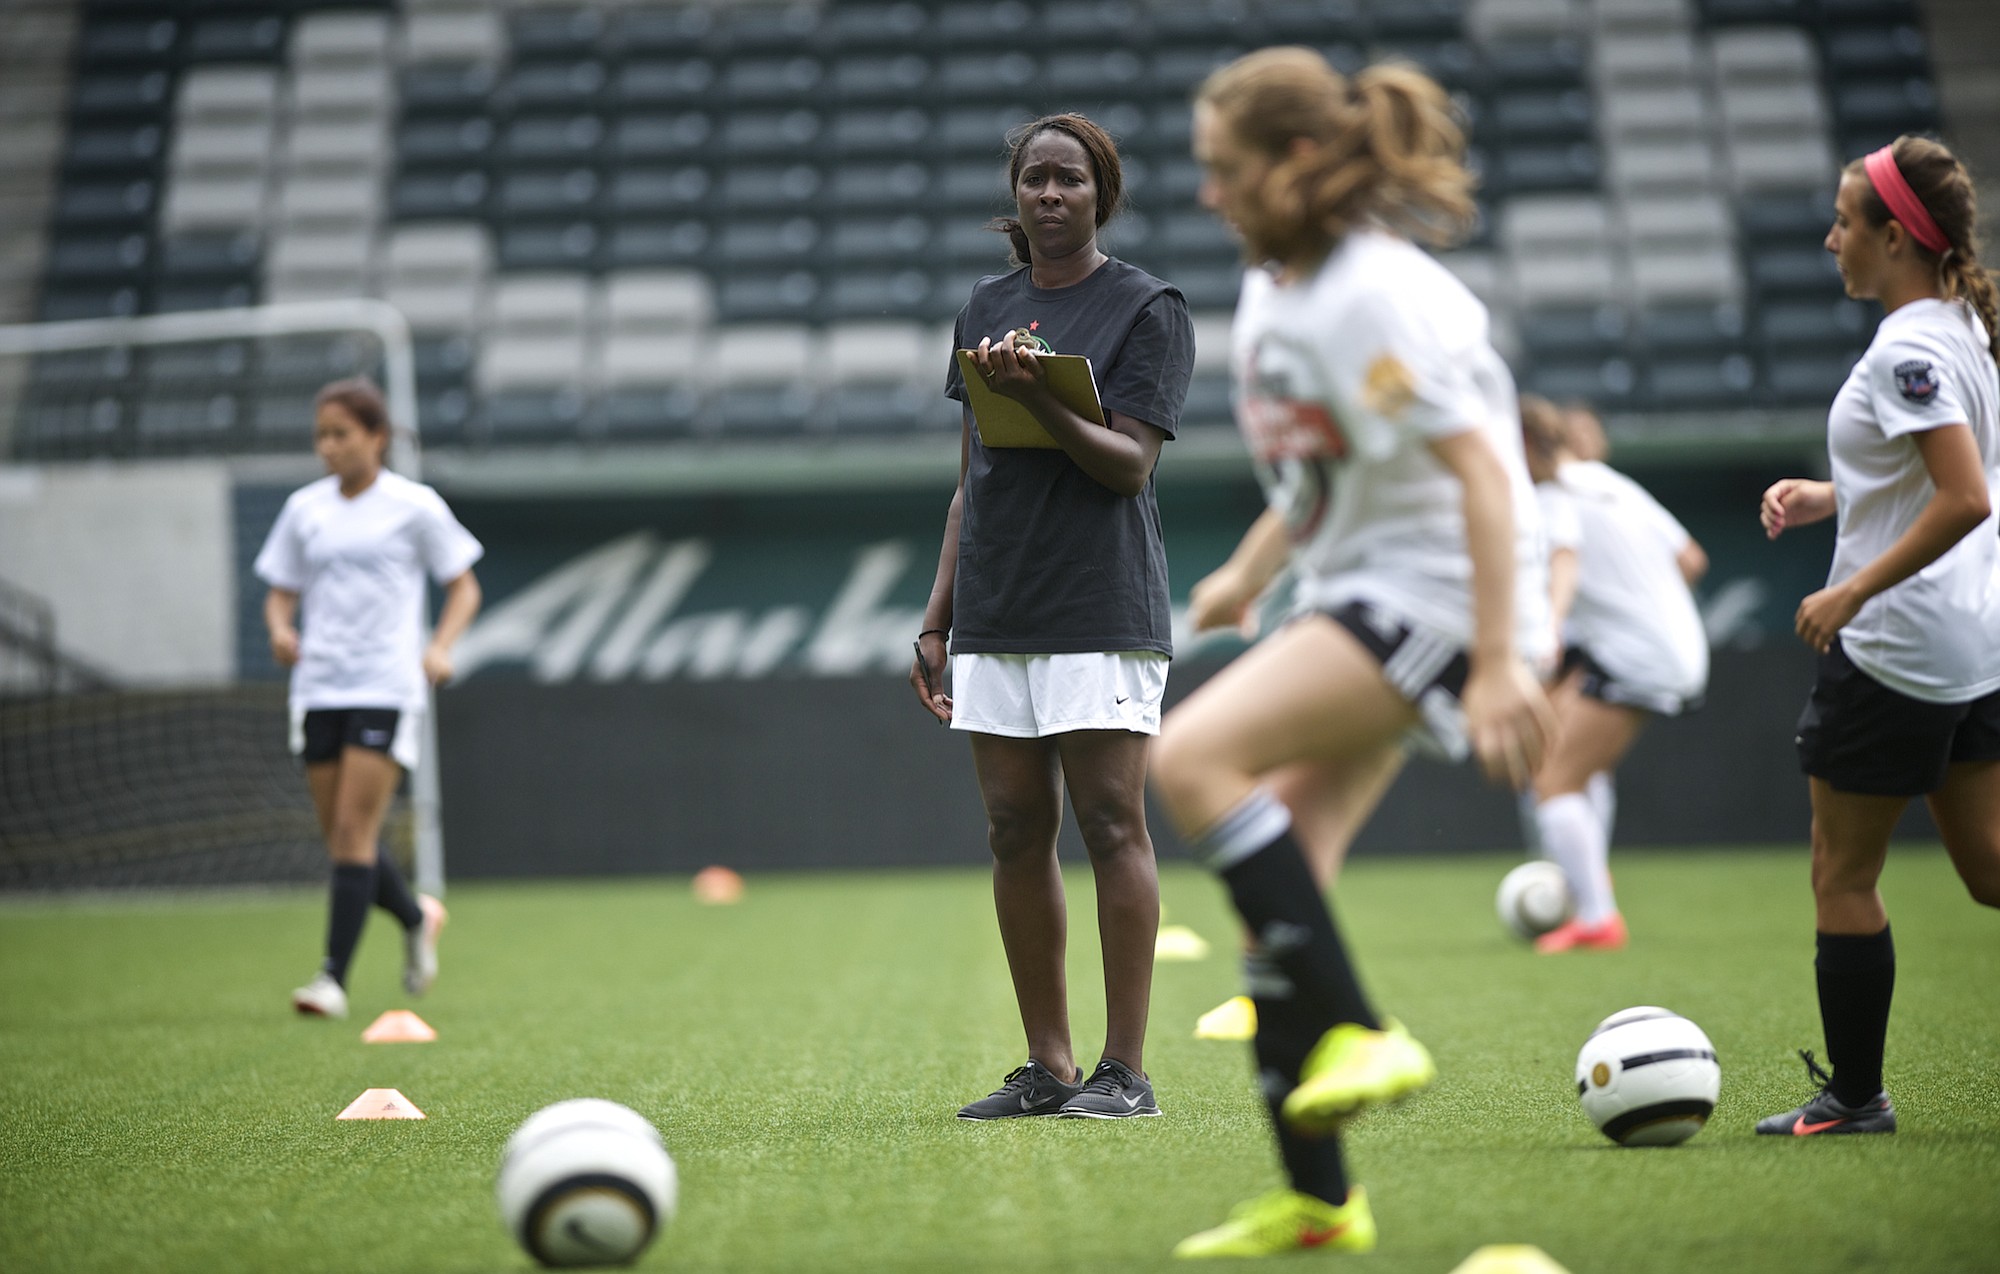 Coaching the new Thorns FC Academy, here at Providence Park in Portland, is just one part of Tina Ellertson's life after her professional playing career.